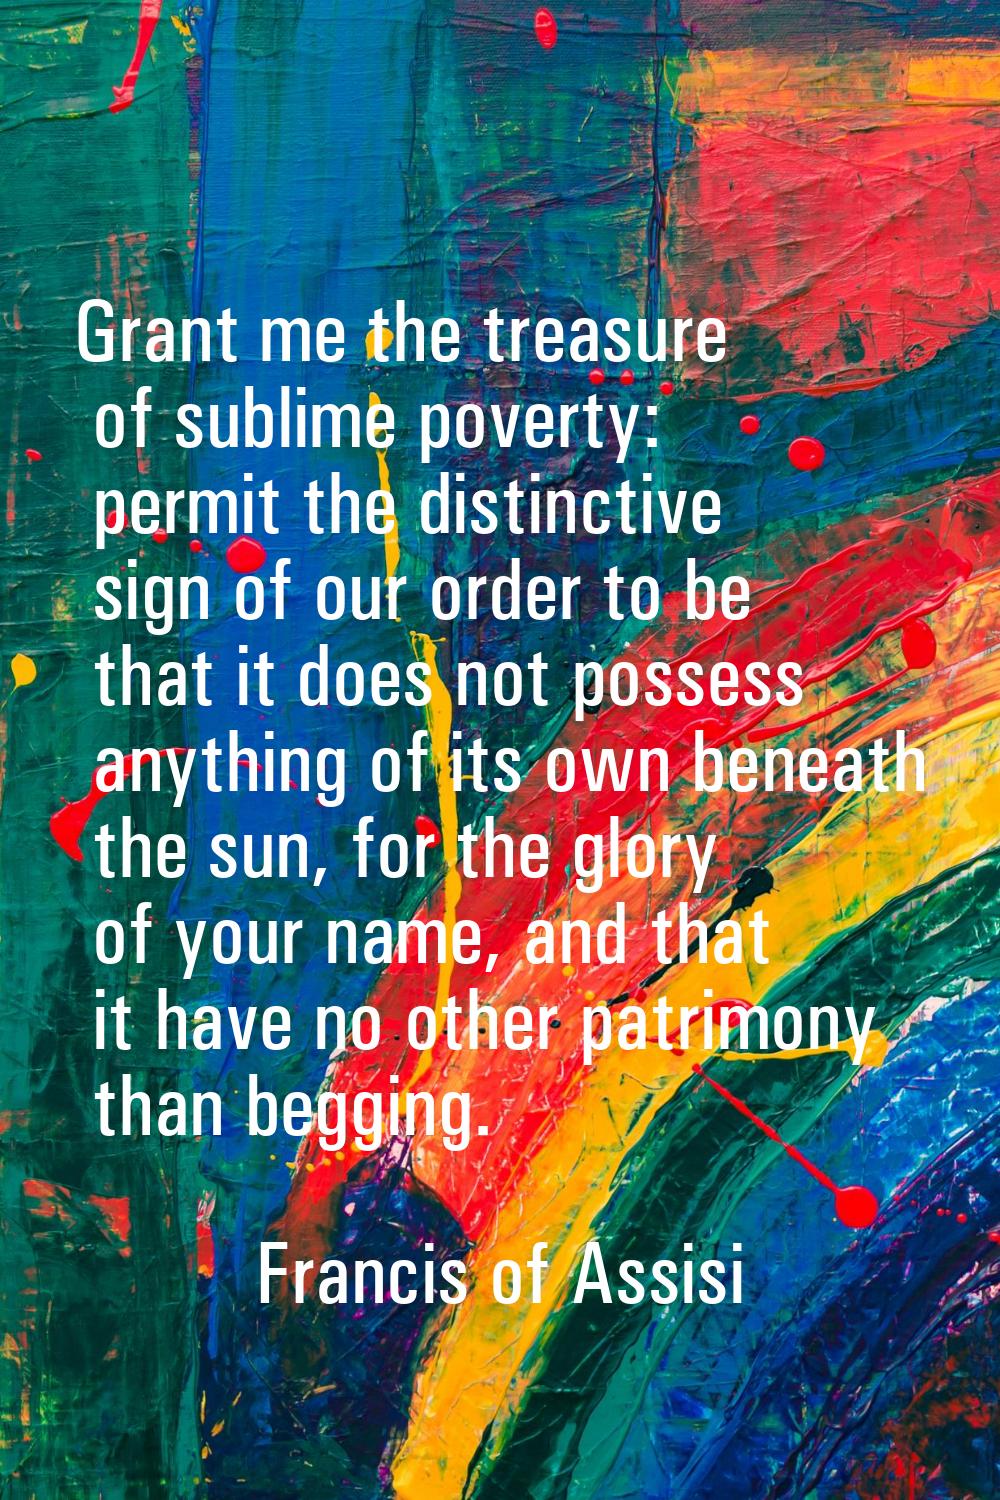 Grant me the treasure of sublime poverty: permit the distinctive sign of our order to be that it do